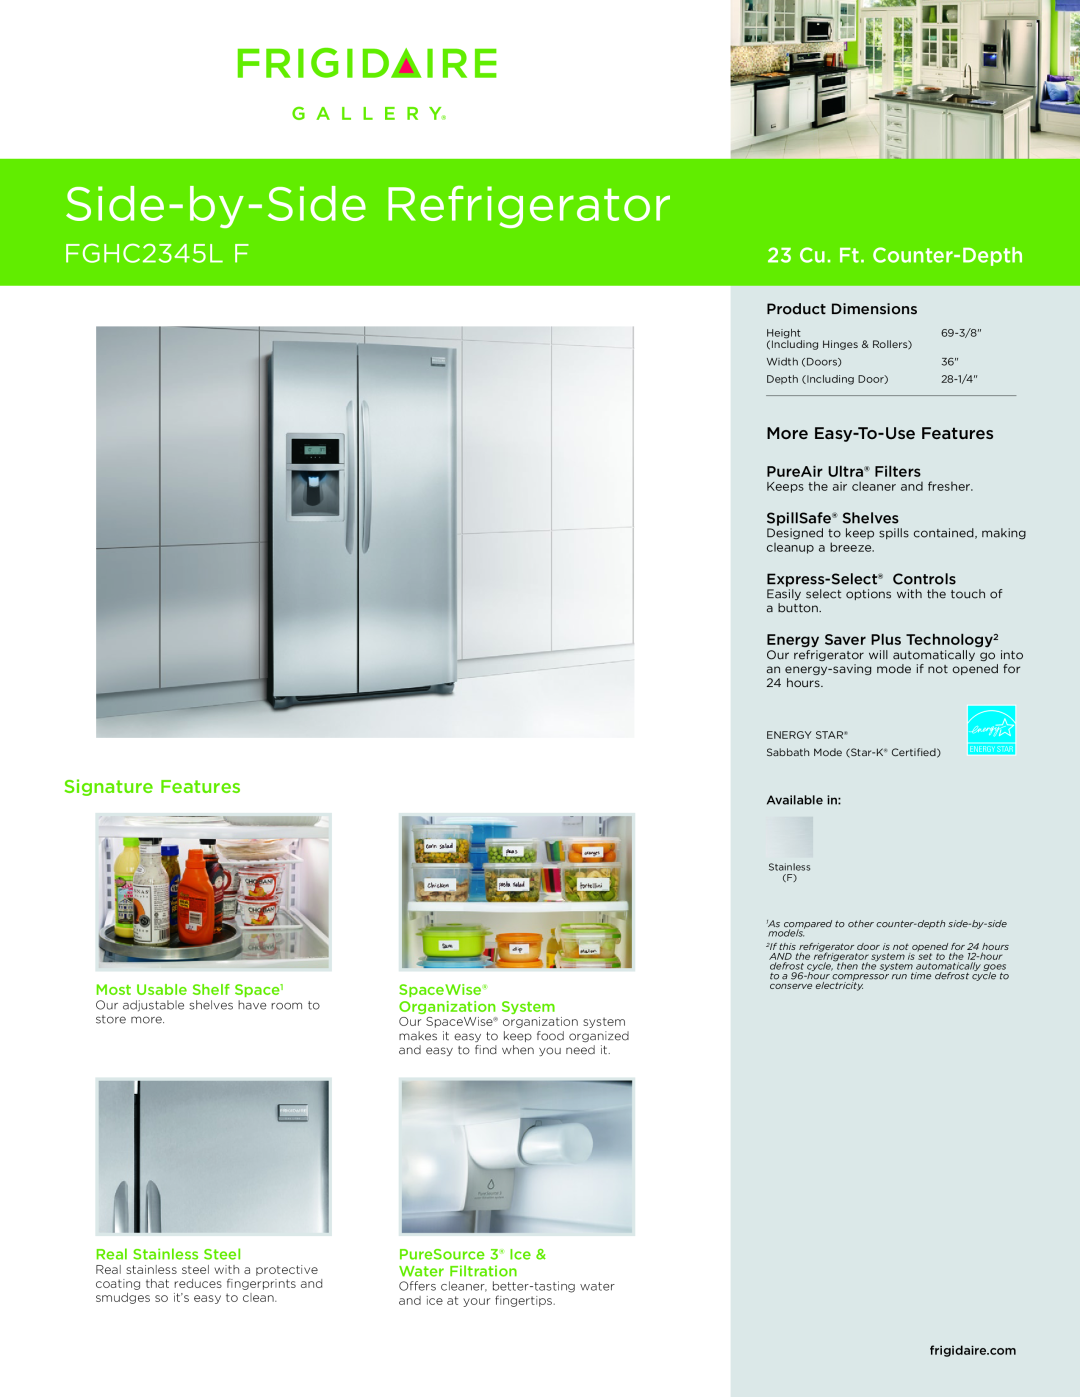 Frigidaire FGHC2345L F dimensions Side-by-SideRefrigerator, 23 Cu. Ft. Counter-Depth, Signature Features, SpaceWise 